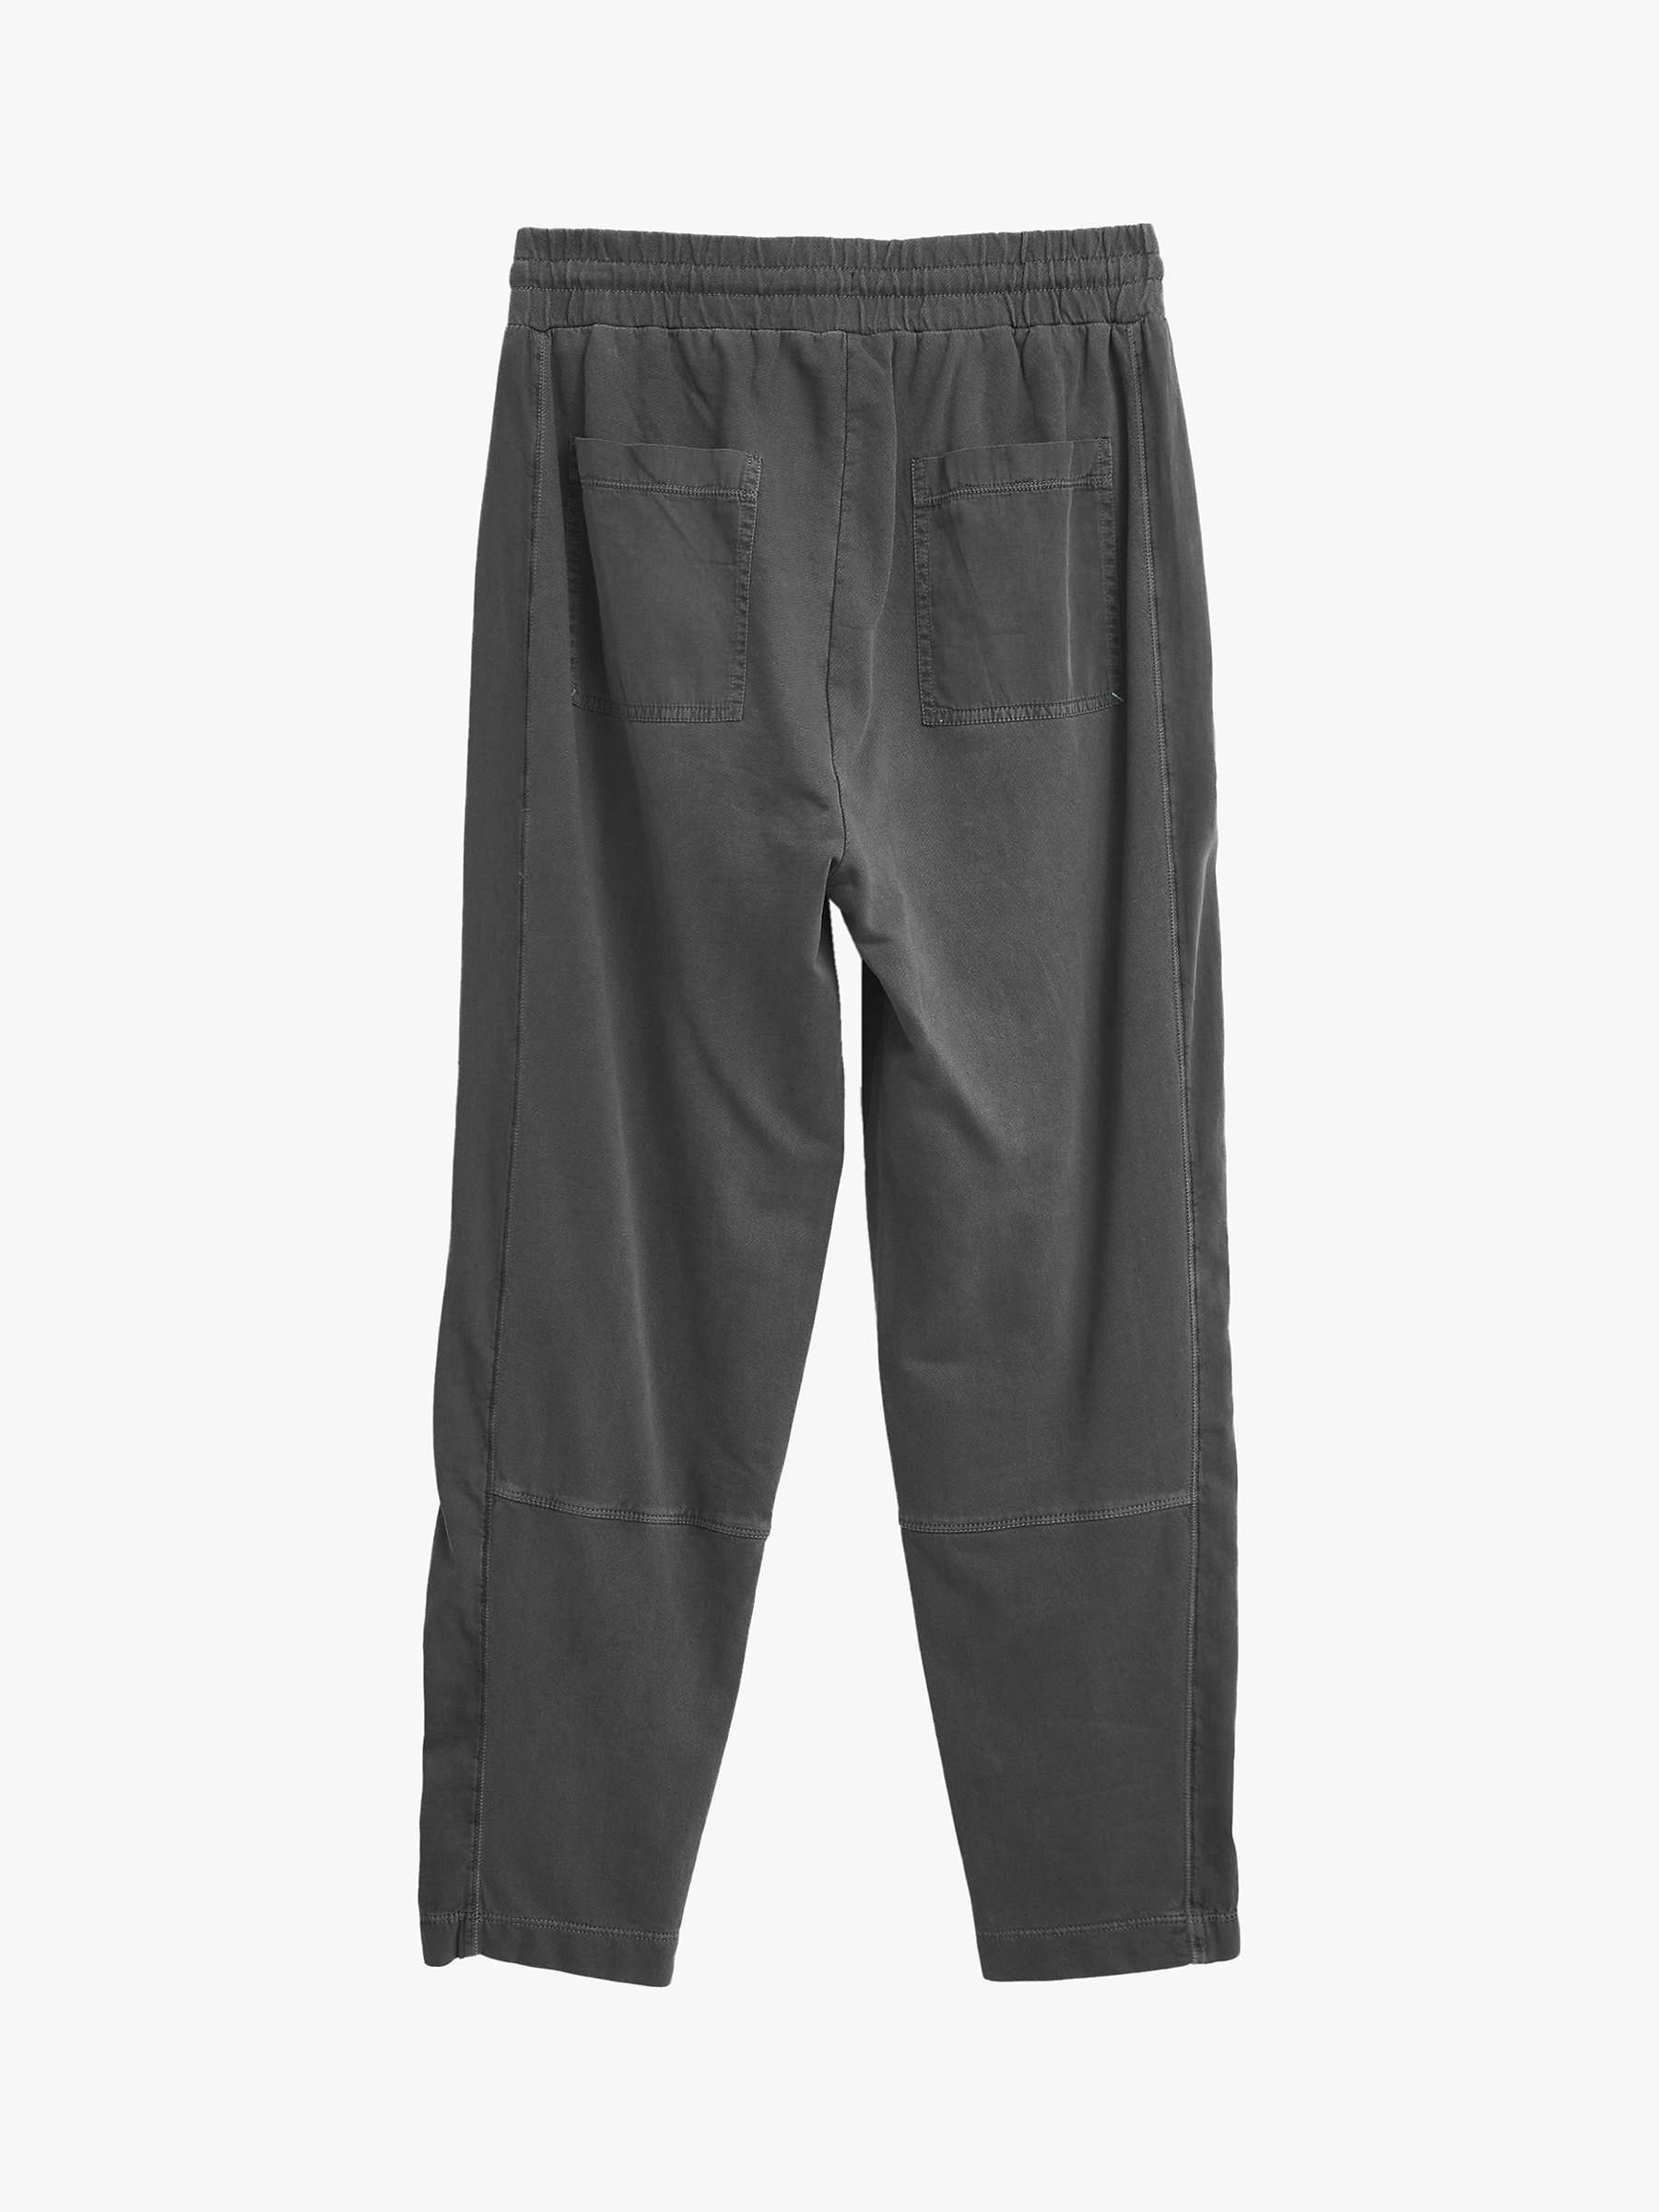 Buy White Stuff Ava Jersey Joggers Online at johnlewis.com